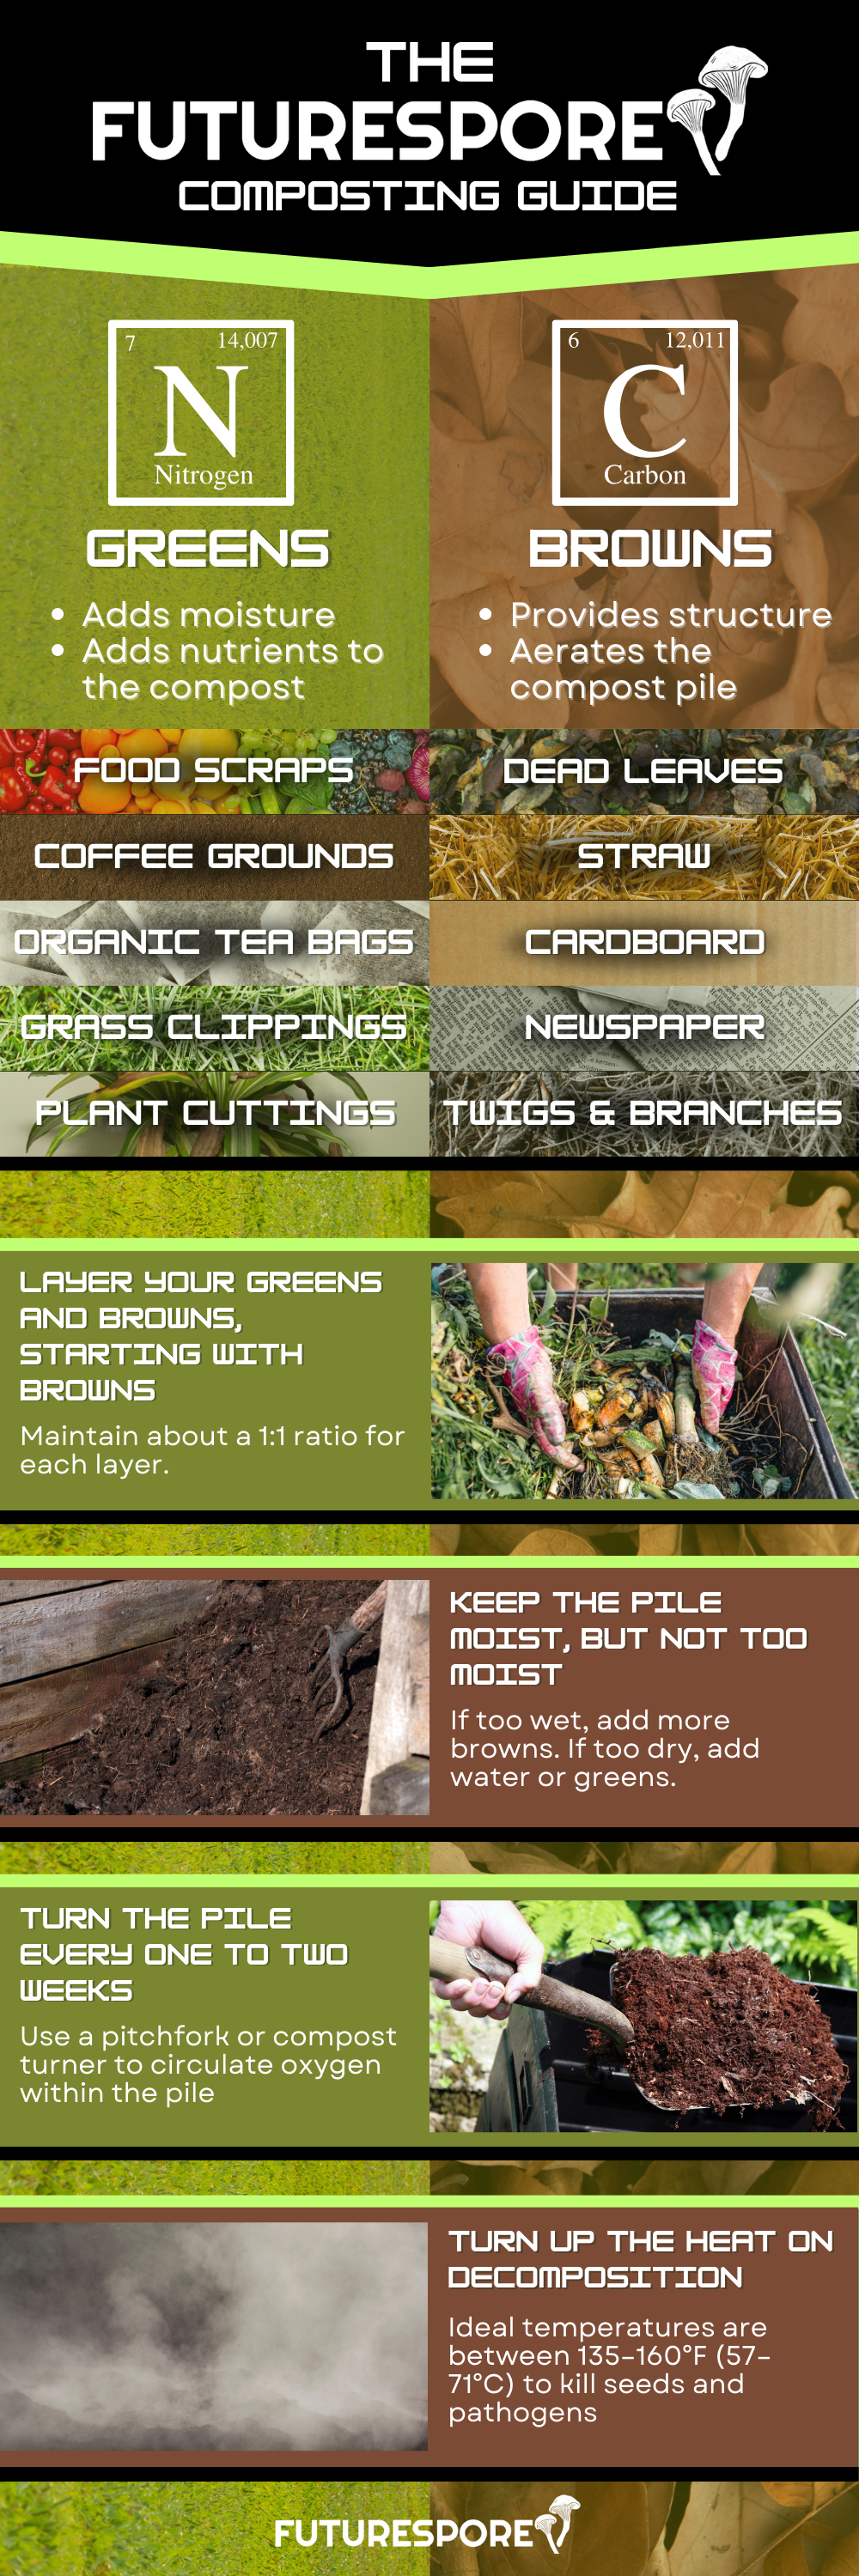 A detailed infographic titled ‘The Futurespore Composting Guide’ with sections on greens and browns for composting. The greens section includes food scraps, coffee grounds, organic tea bags, grass clippings, and plant cuttings. The browns section includes dead leaves, straw, cardboard, newspaper, and twigs & branches. Additional instructions for layering greens and browns, maintaining moisture, turning the pile, and heating for decomposition are provided. The guide features various images of com